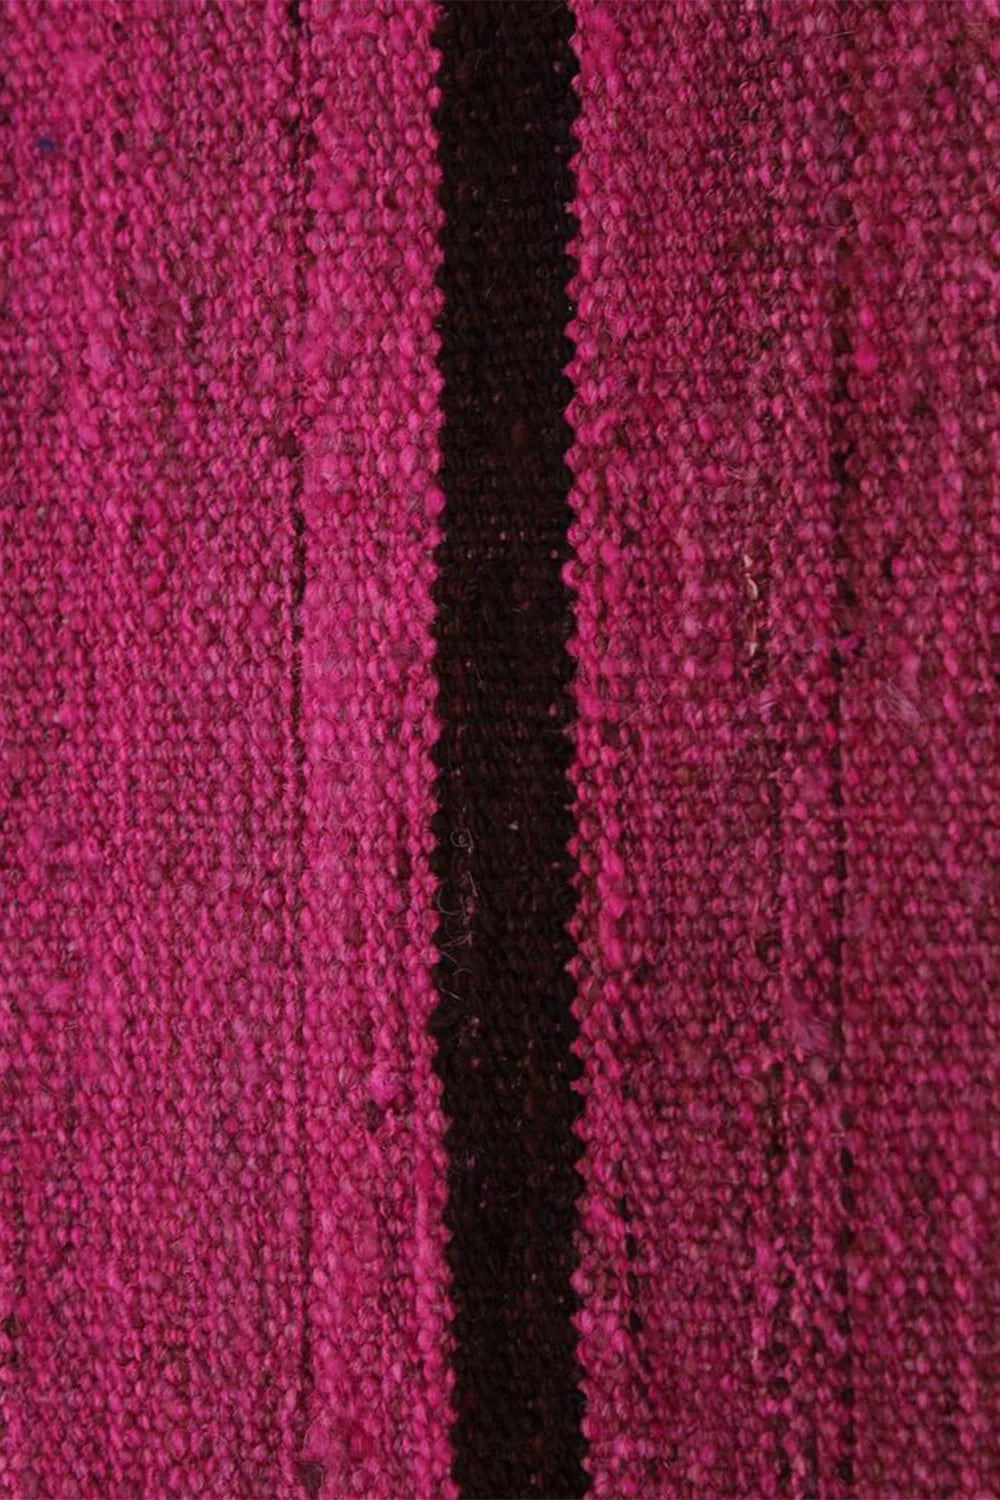 Bold Pink Abstract Hallway Rug in Large 10x14 Size for a Dramatic Entrance